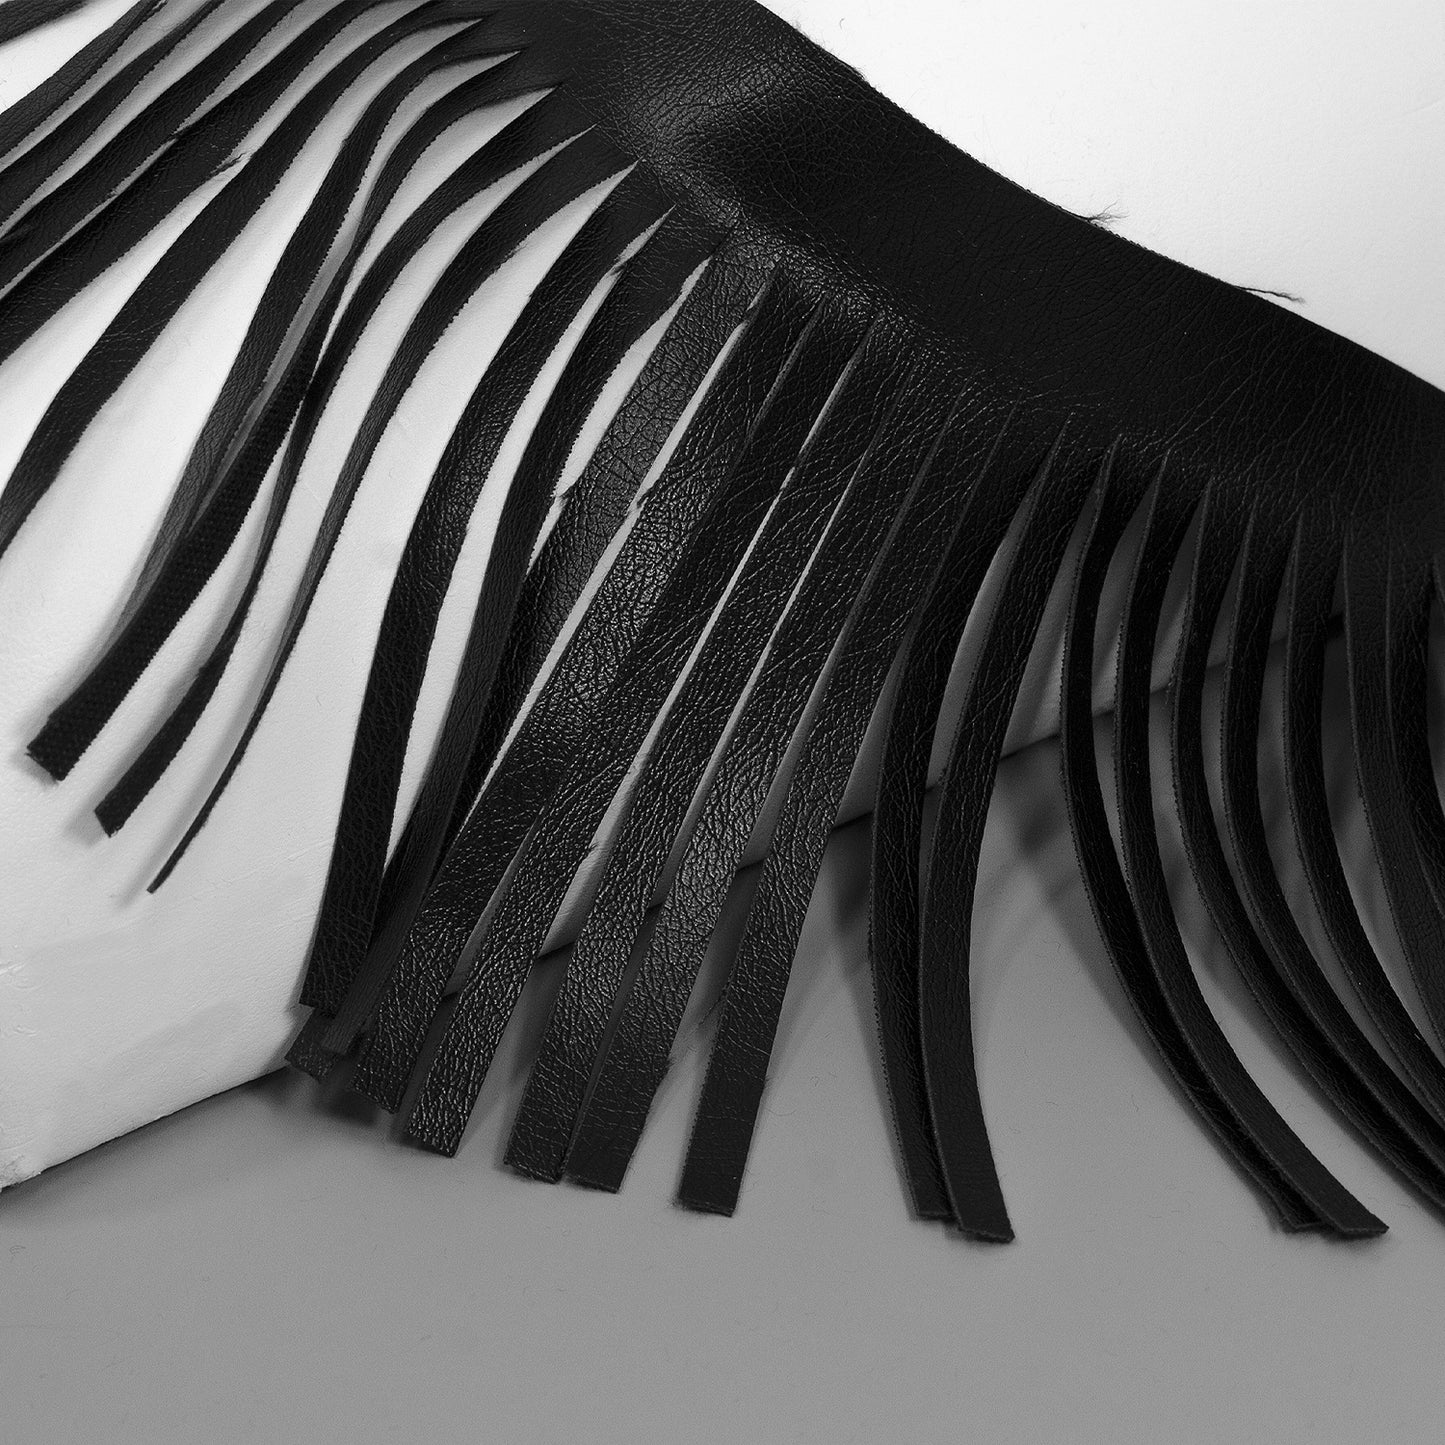 4" Glossy Finish Vegan Leather Fringe Trim (Sold by the Yard)